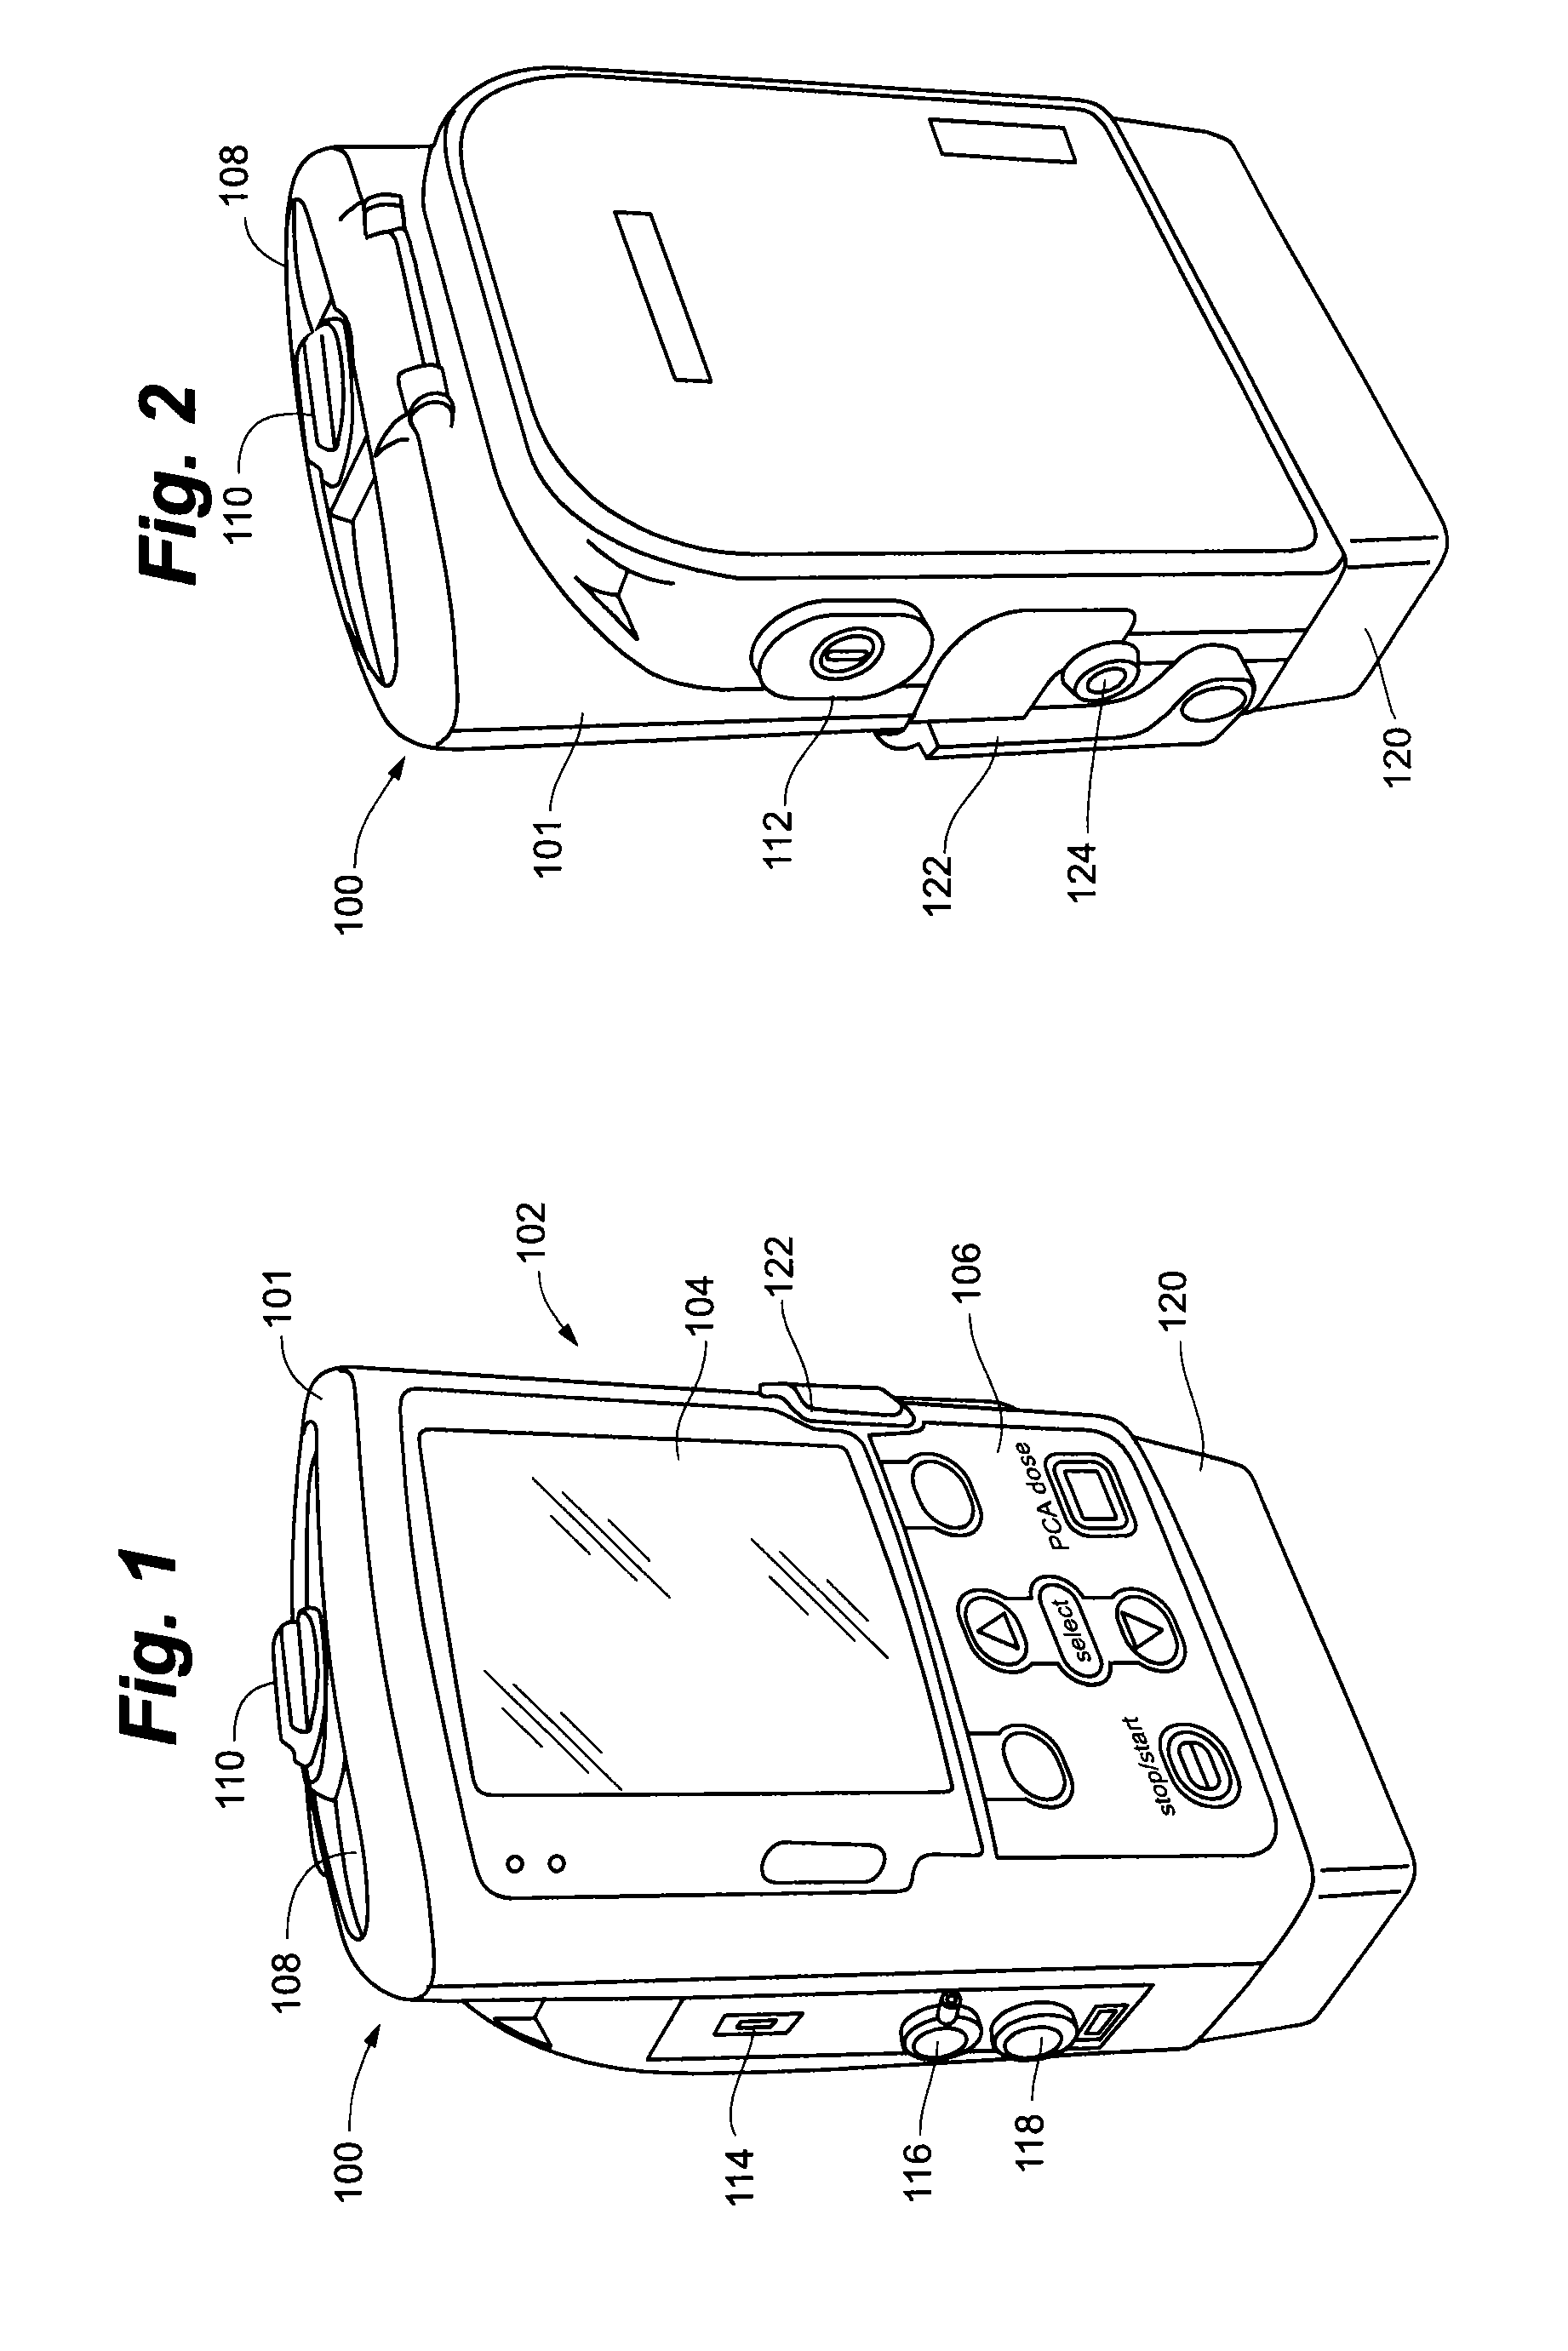 Guided user help system for an ambulatory infusion system